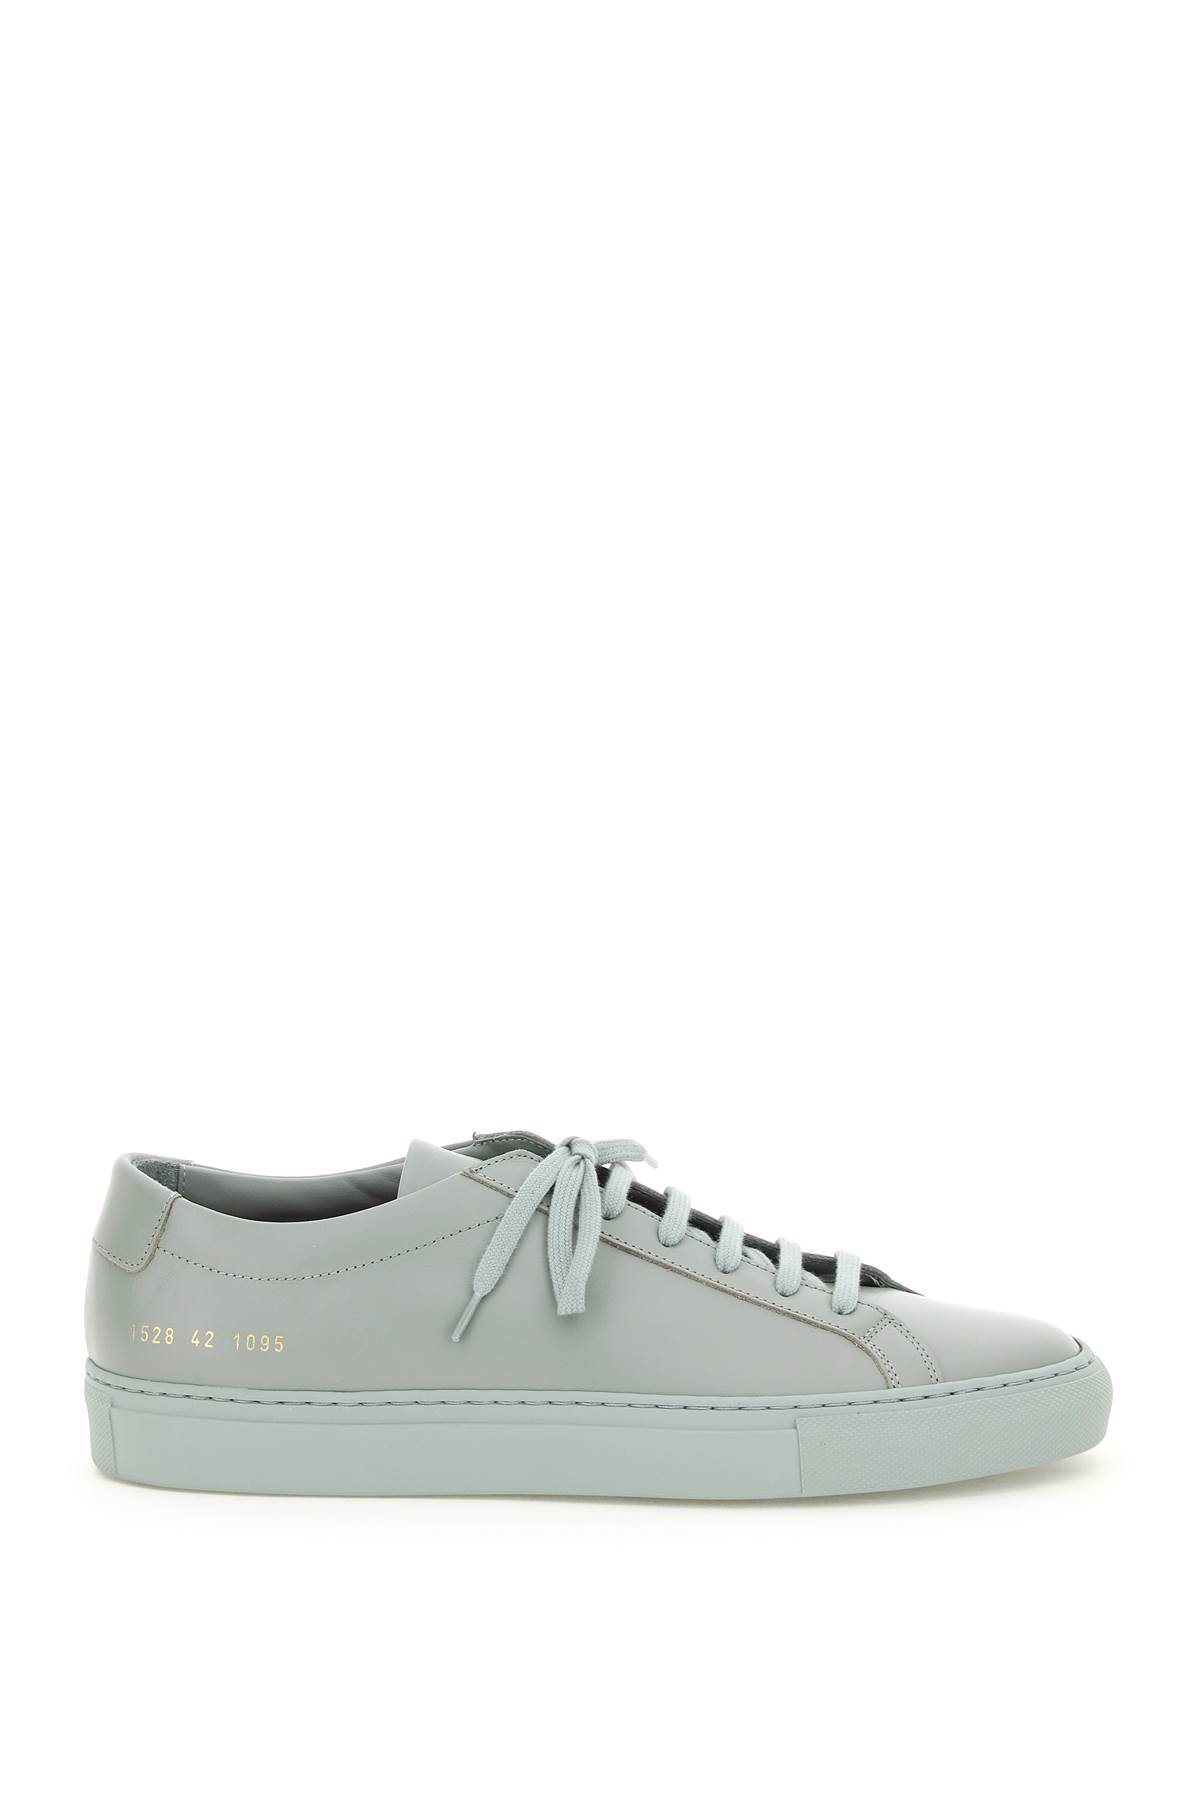 Shop Common Projects Original Achilles Low Sneakers In Vintage Green (green)